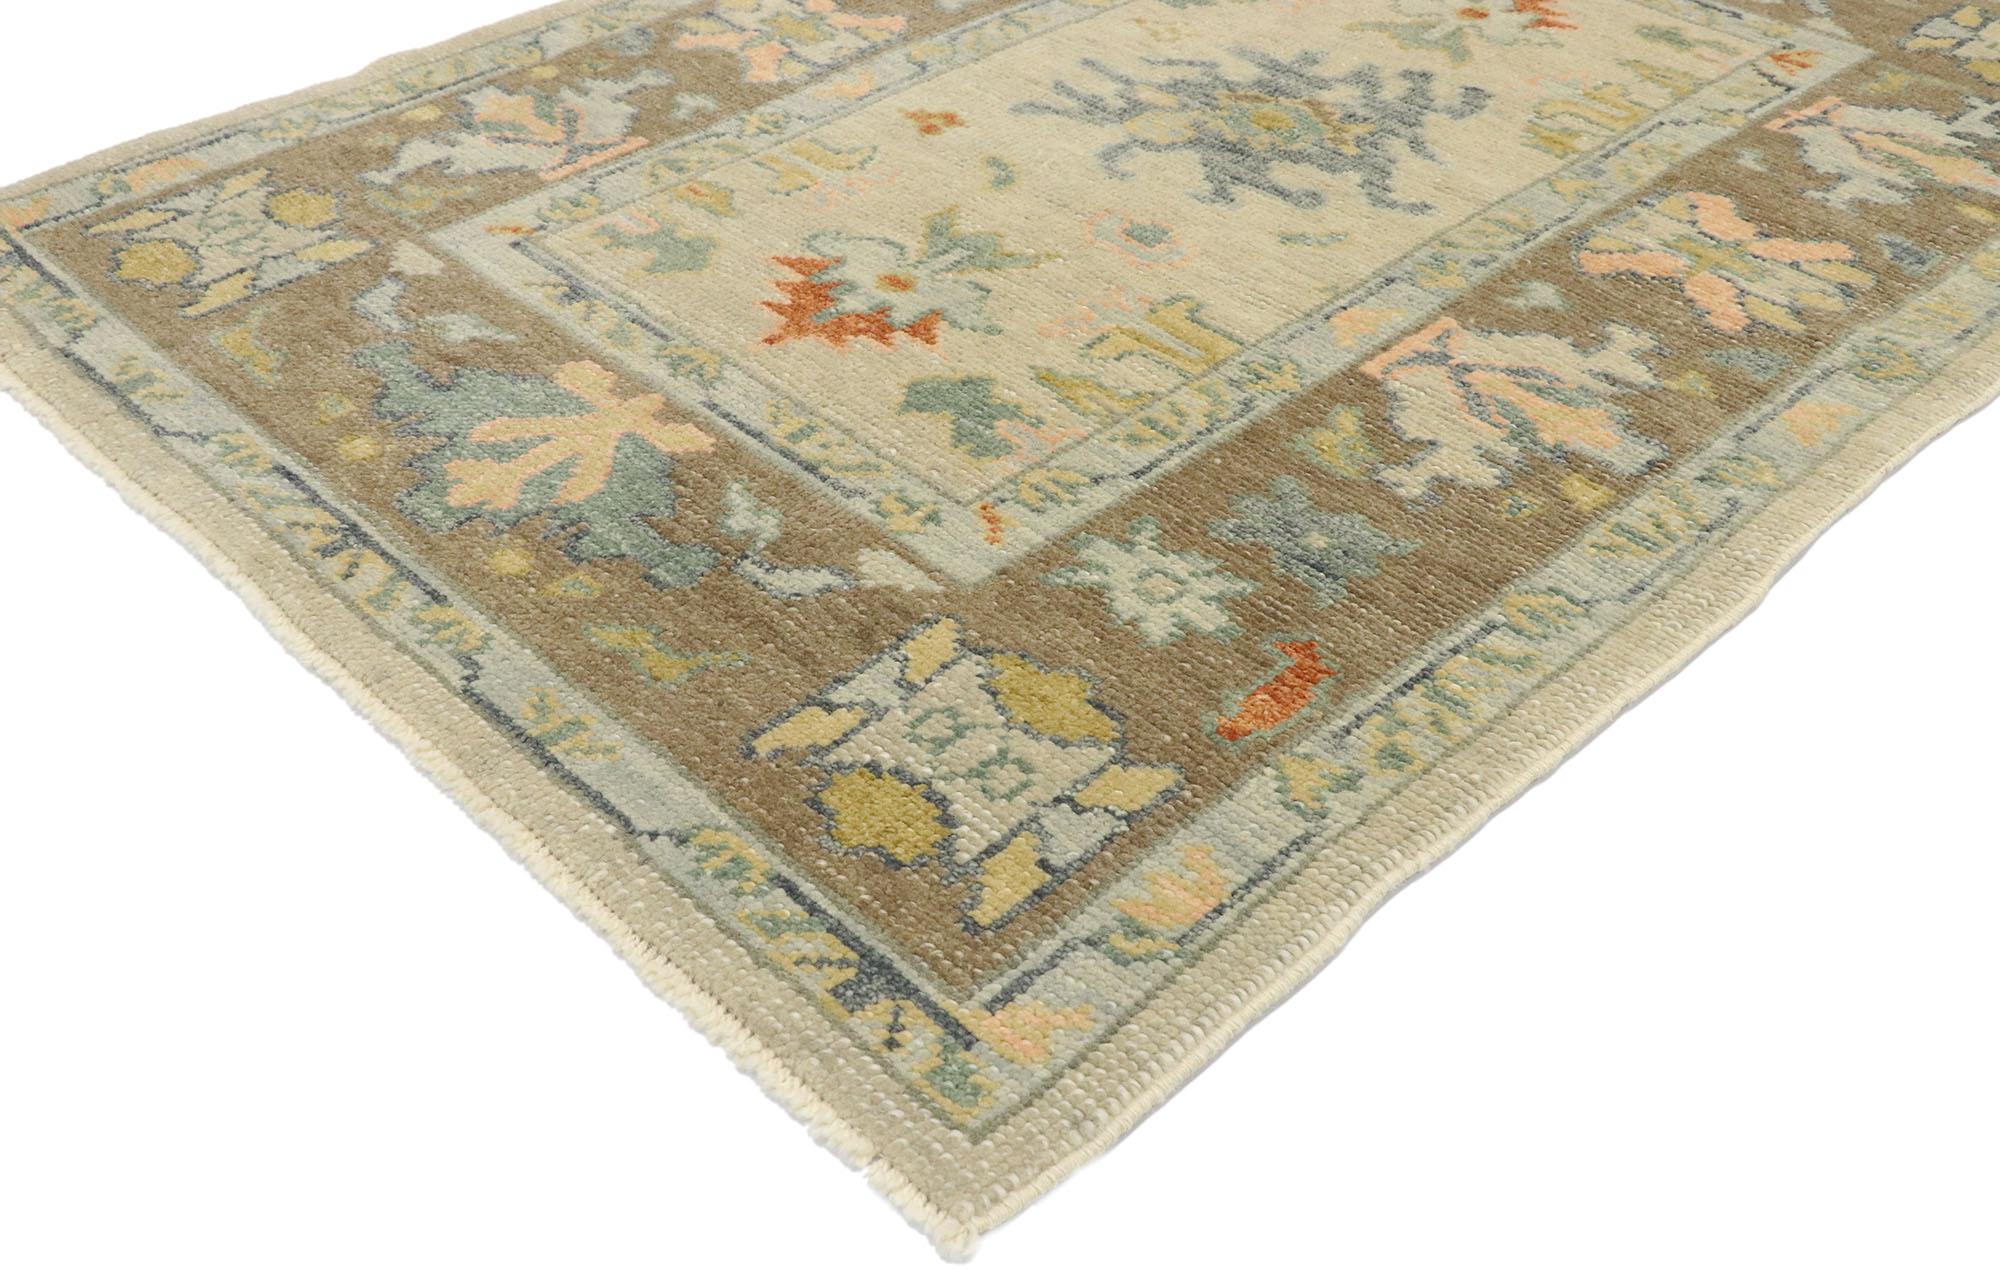 53422, new contemporary Turkish Oushak rug with modern Cape Cod Coastal style. Blending coastal elements from the modern world with earth-tone colors, this hand knotted wool contemporary Turkish Oushak rug beautifully embodies a modern Cape Cod